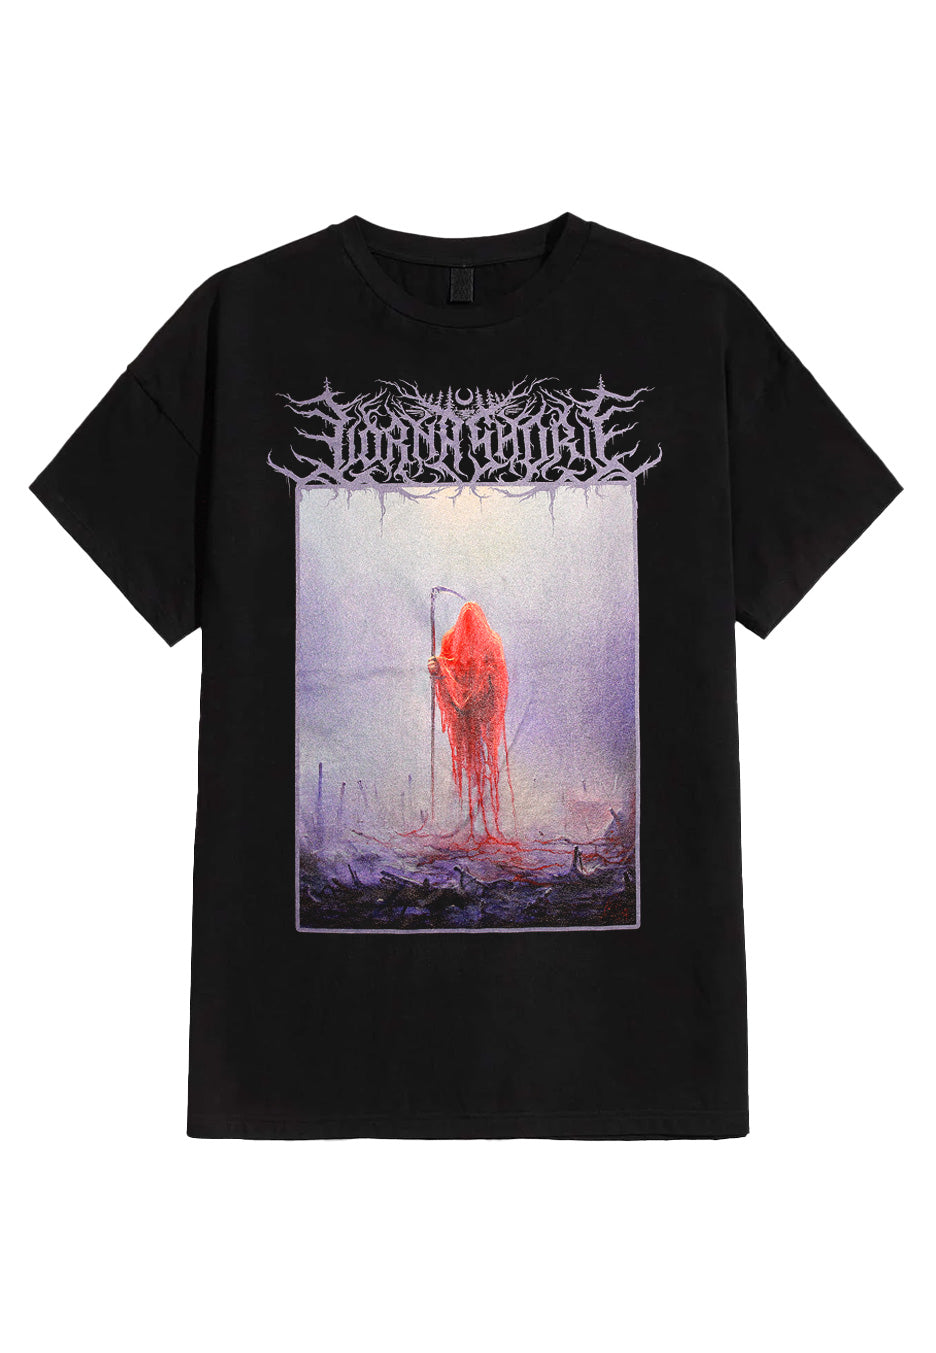 Lorna Shore - And I Return To Nothingness Cover - T-Shirt